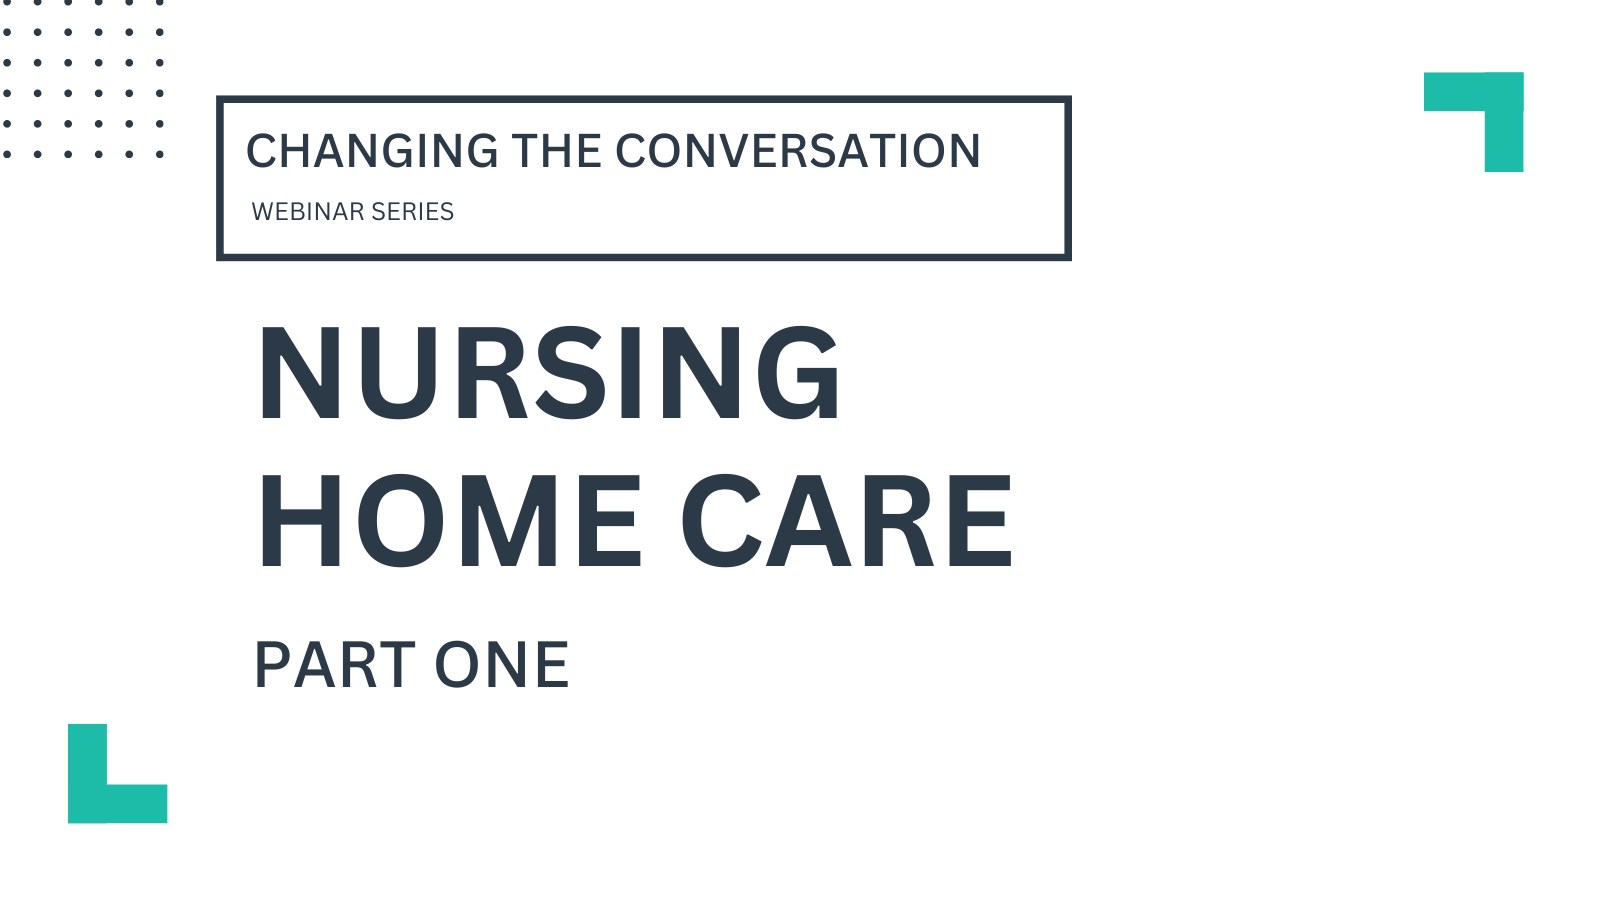 Changing the Conversation Topic: Nursing Home Care